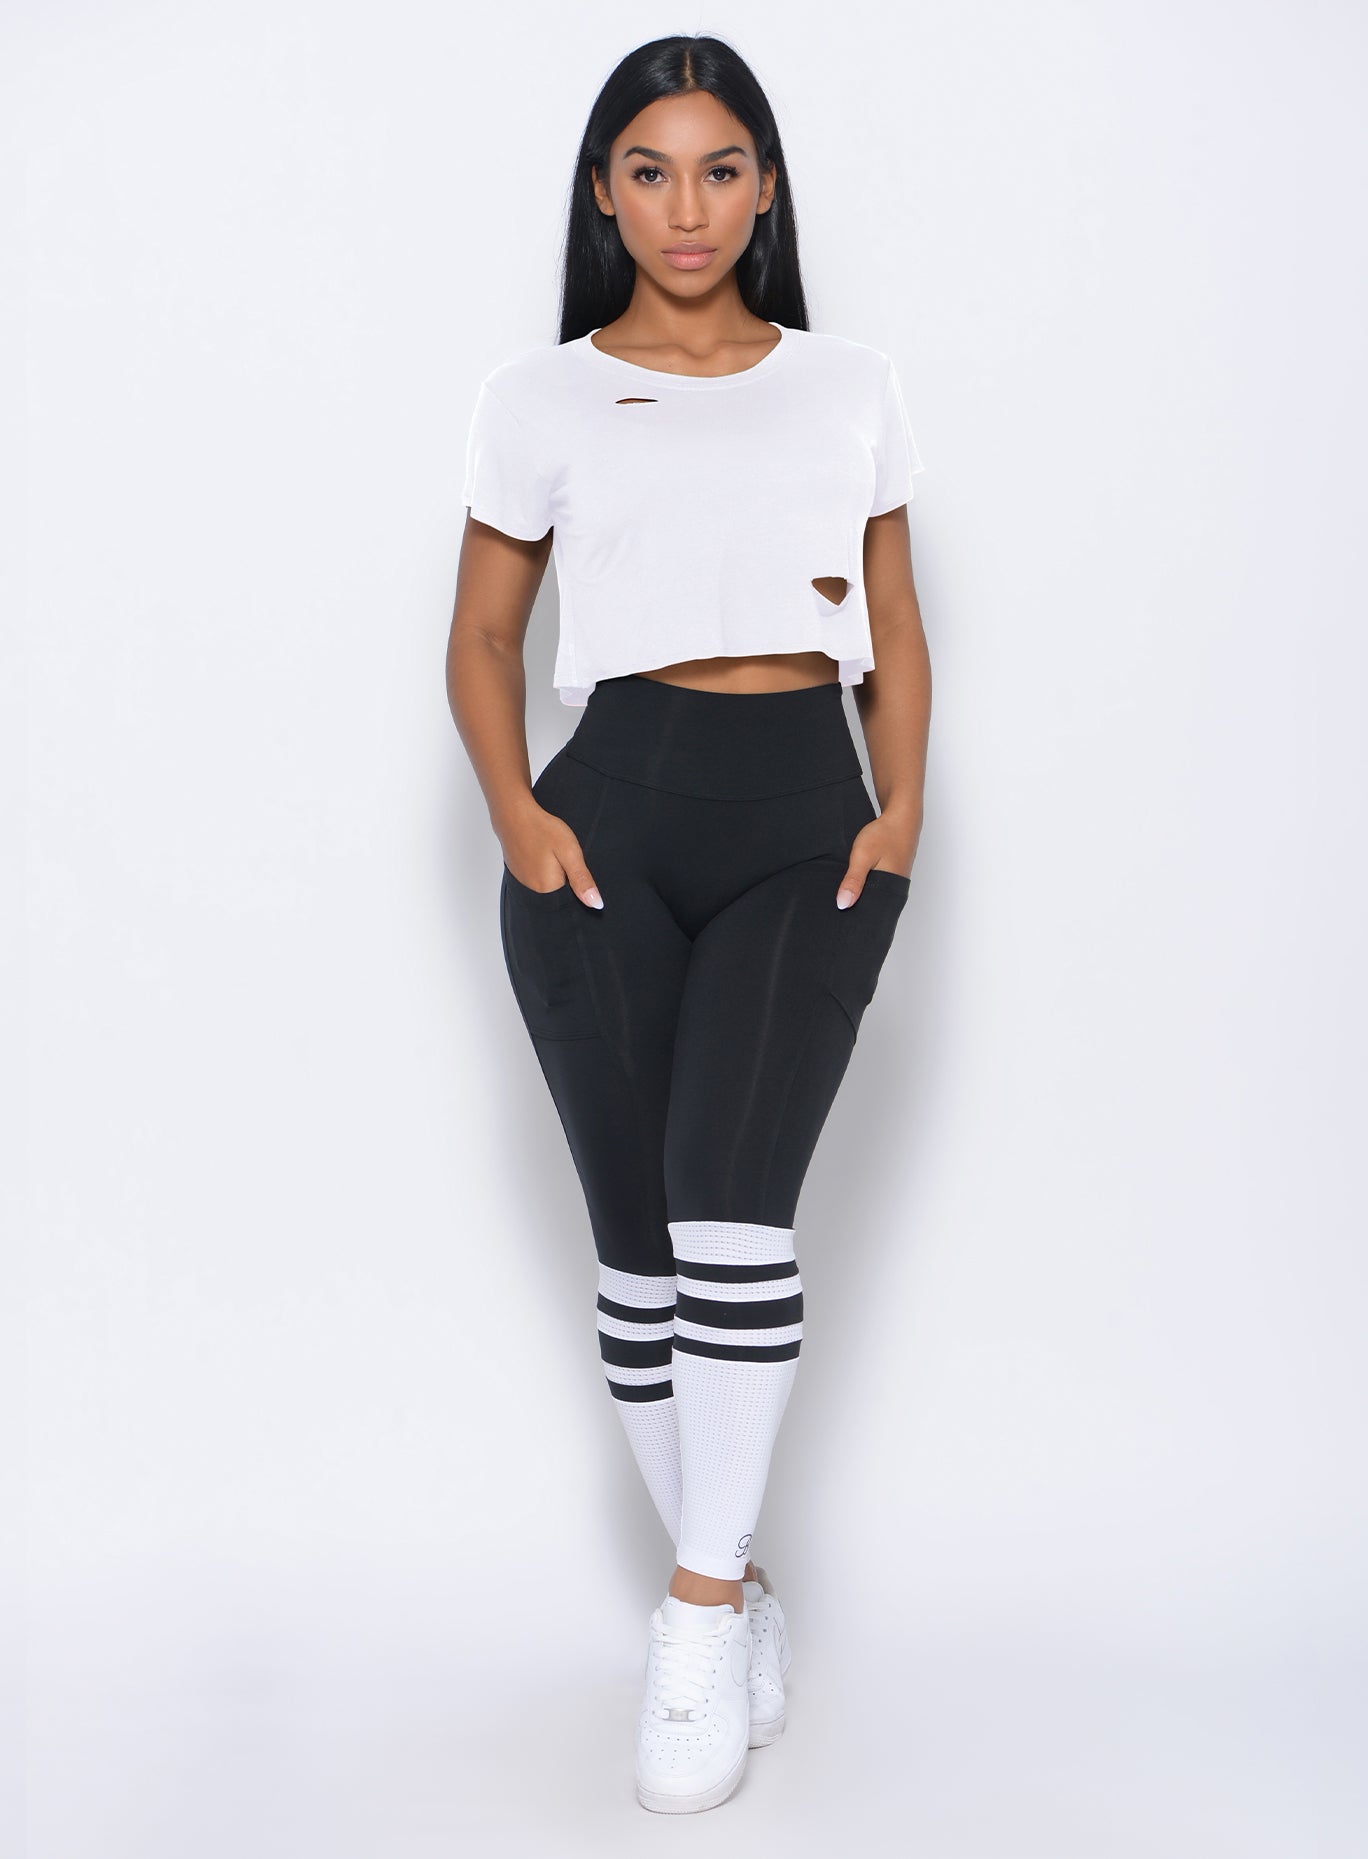 Model facing forward with her hands in pocket wearing our black perform sock leggings and a white top 